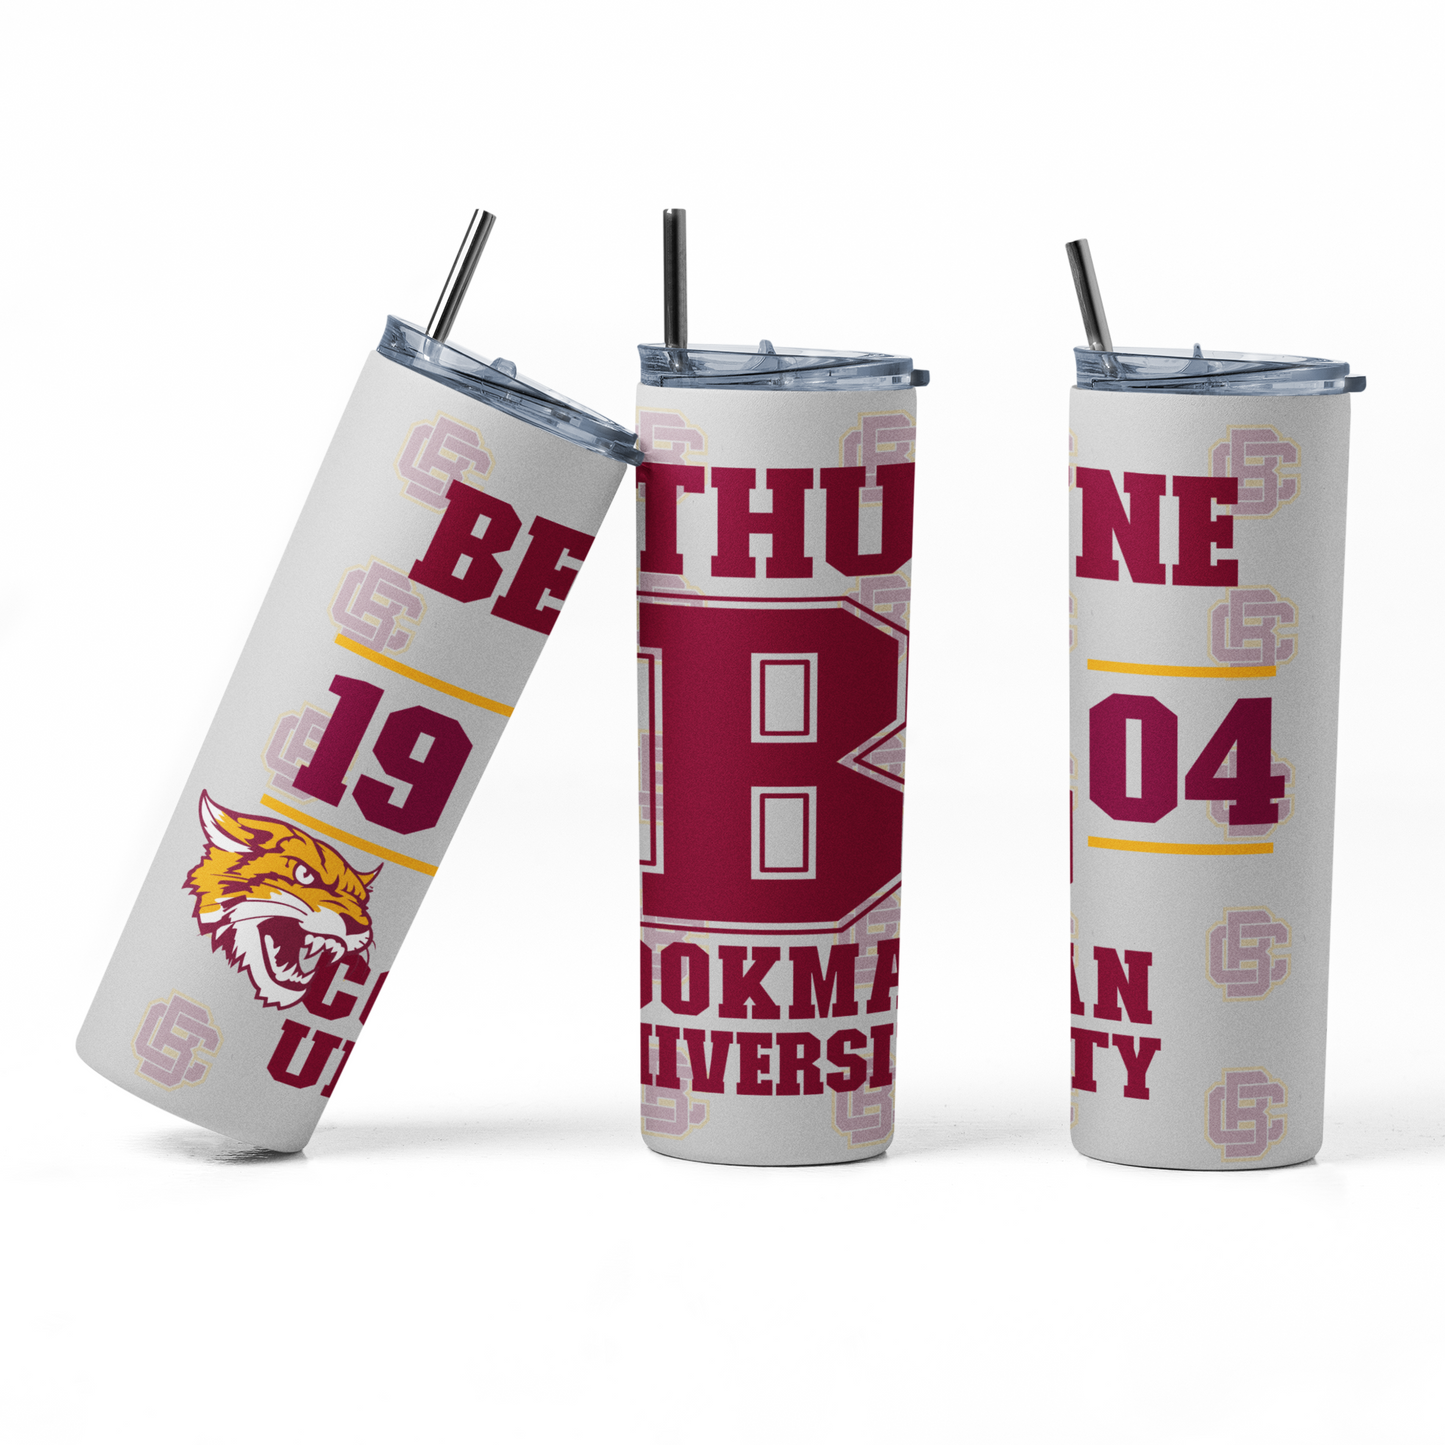 20oz HBCU Tumbler Collection: Bethune Cookman, Alcorn State, Jackson State U, Morgan State U | Gifts for All | Beverage